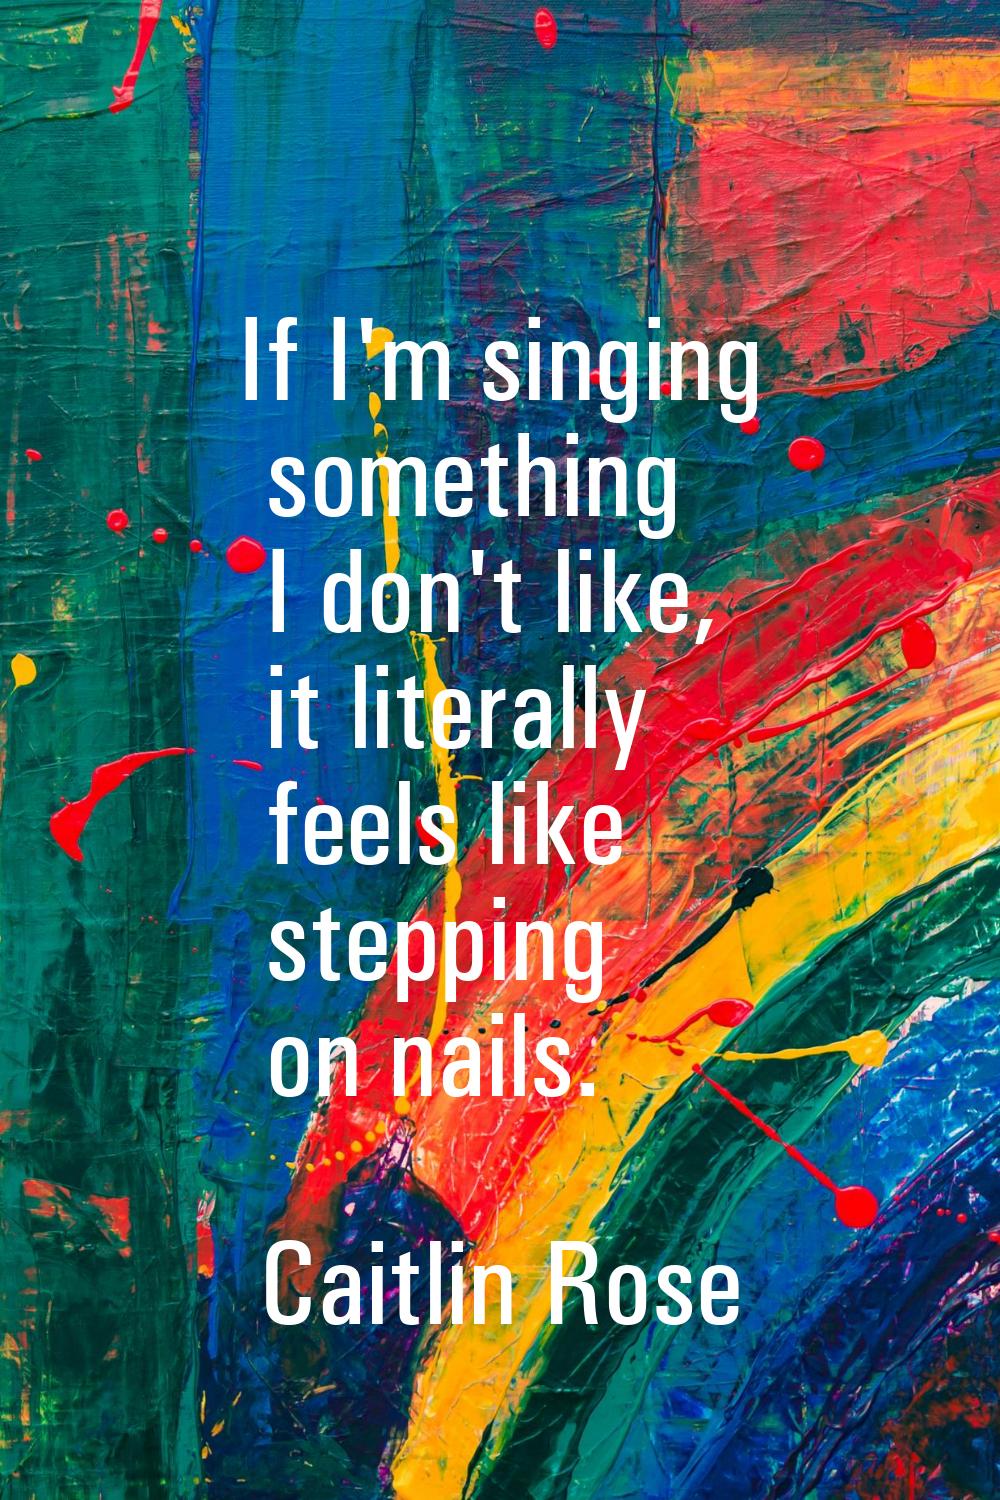 If I'm singing something I don't like, it literally feels like stepping on nails.